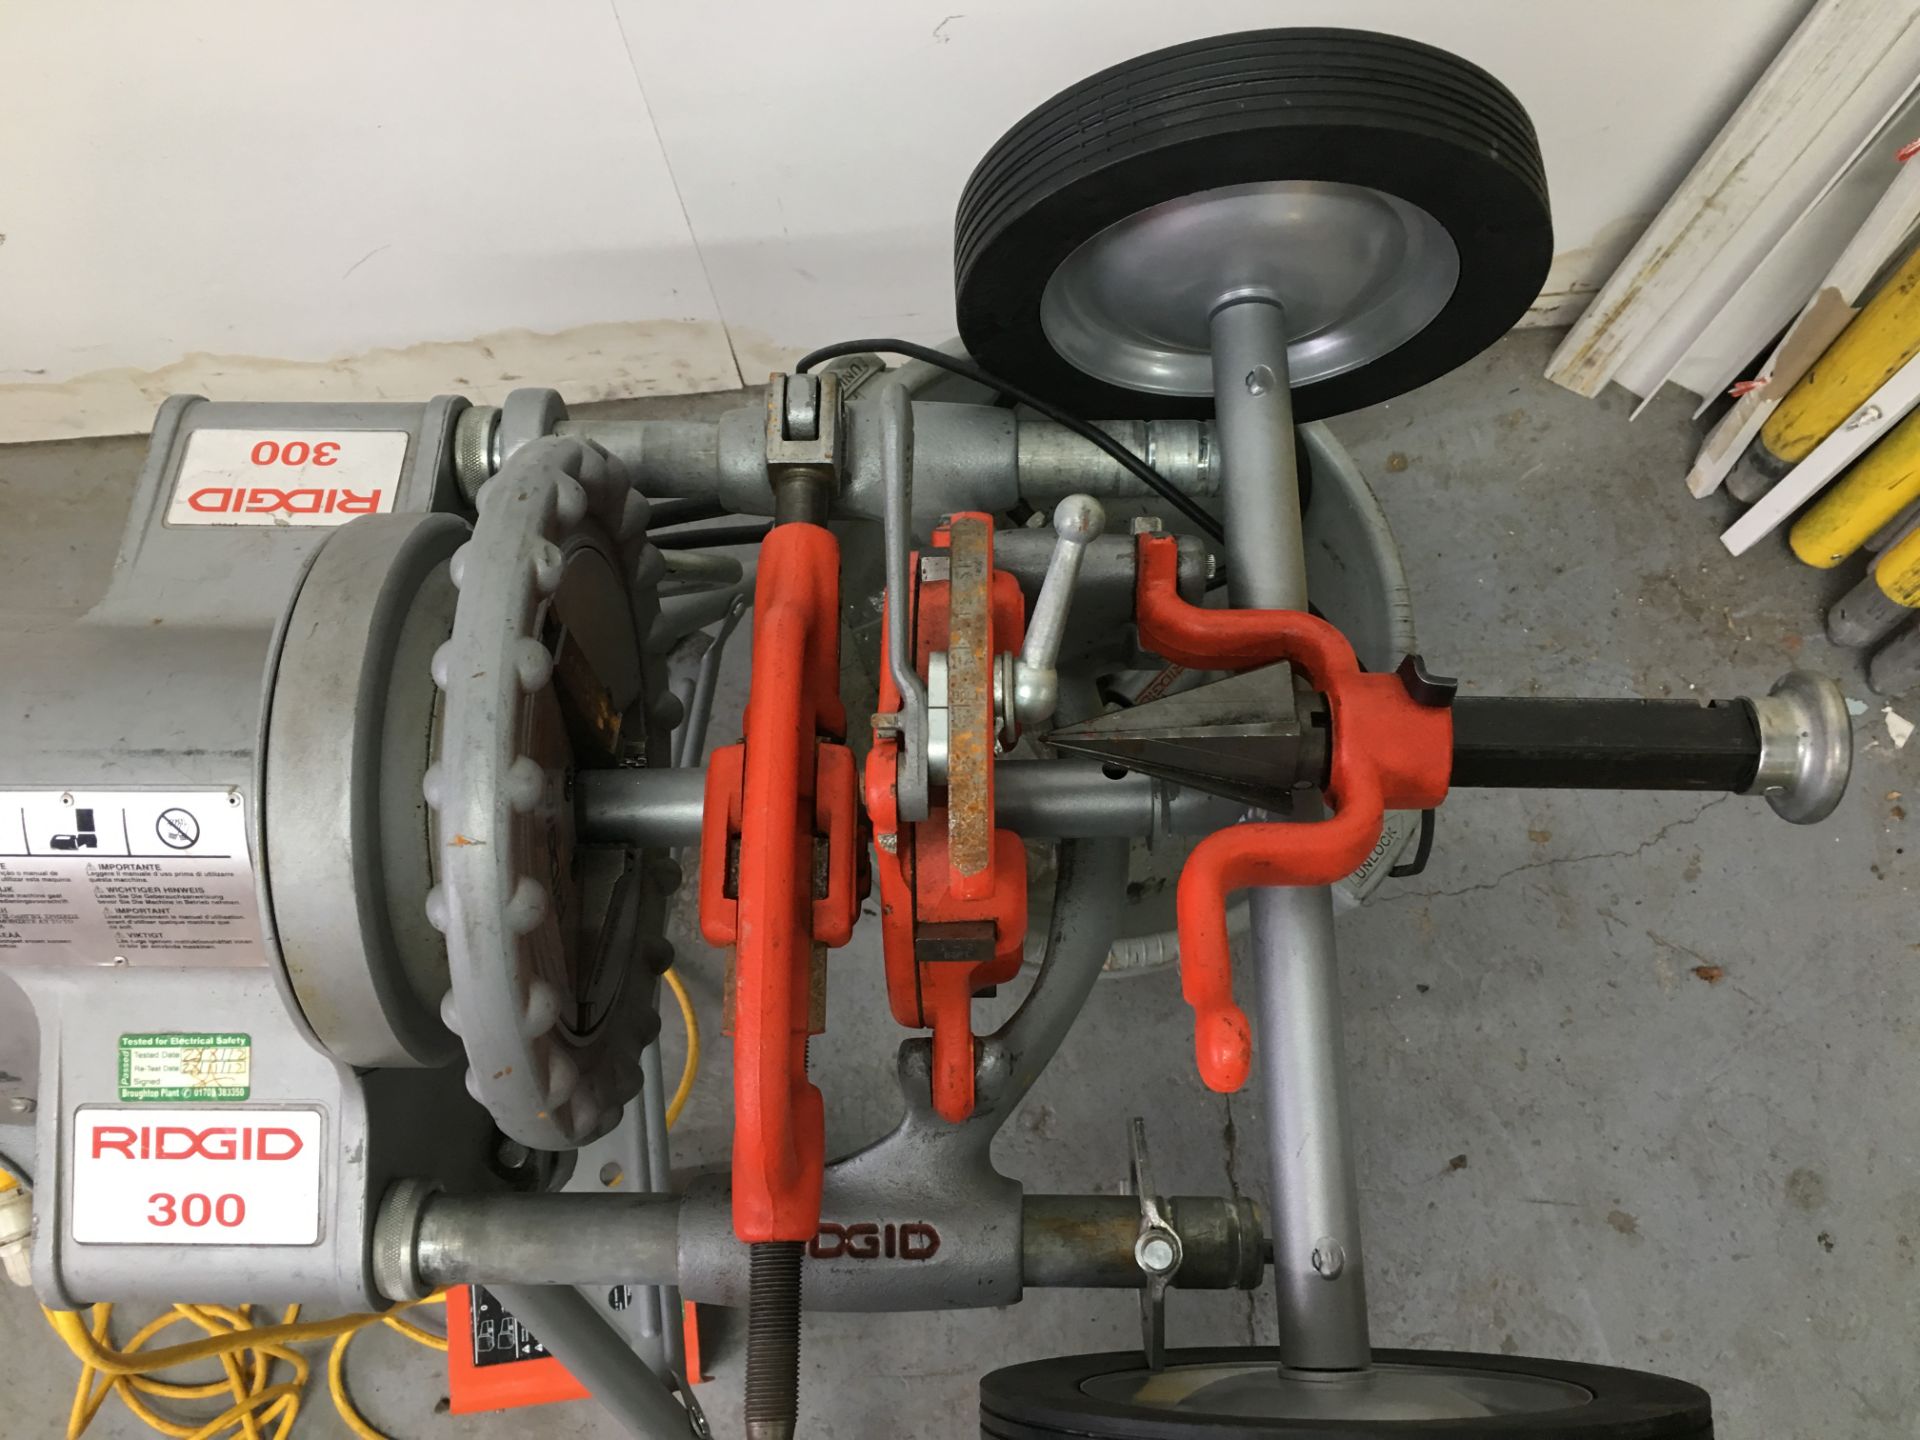 Ridgid 300 electric pipe threader with foot switch and oil bucket - Image 2 of 4